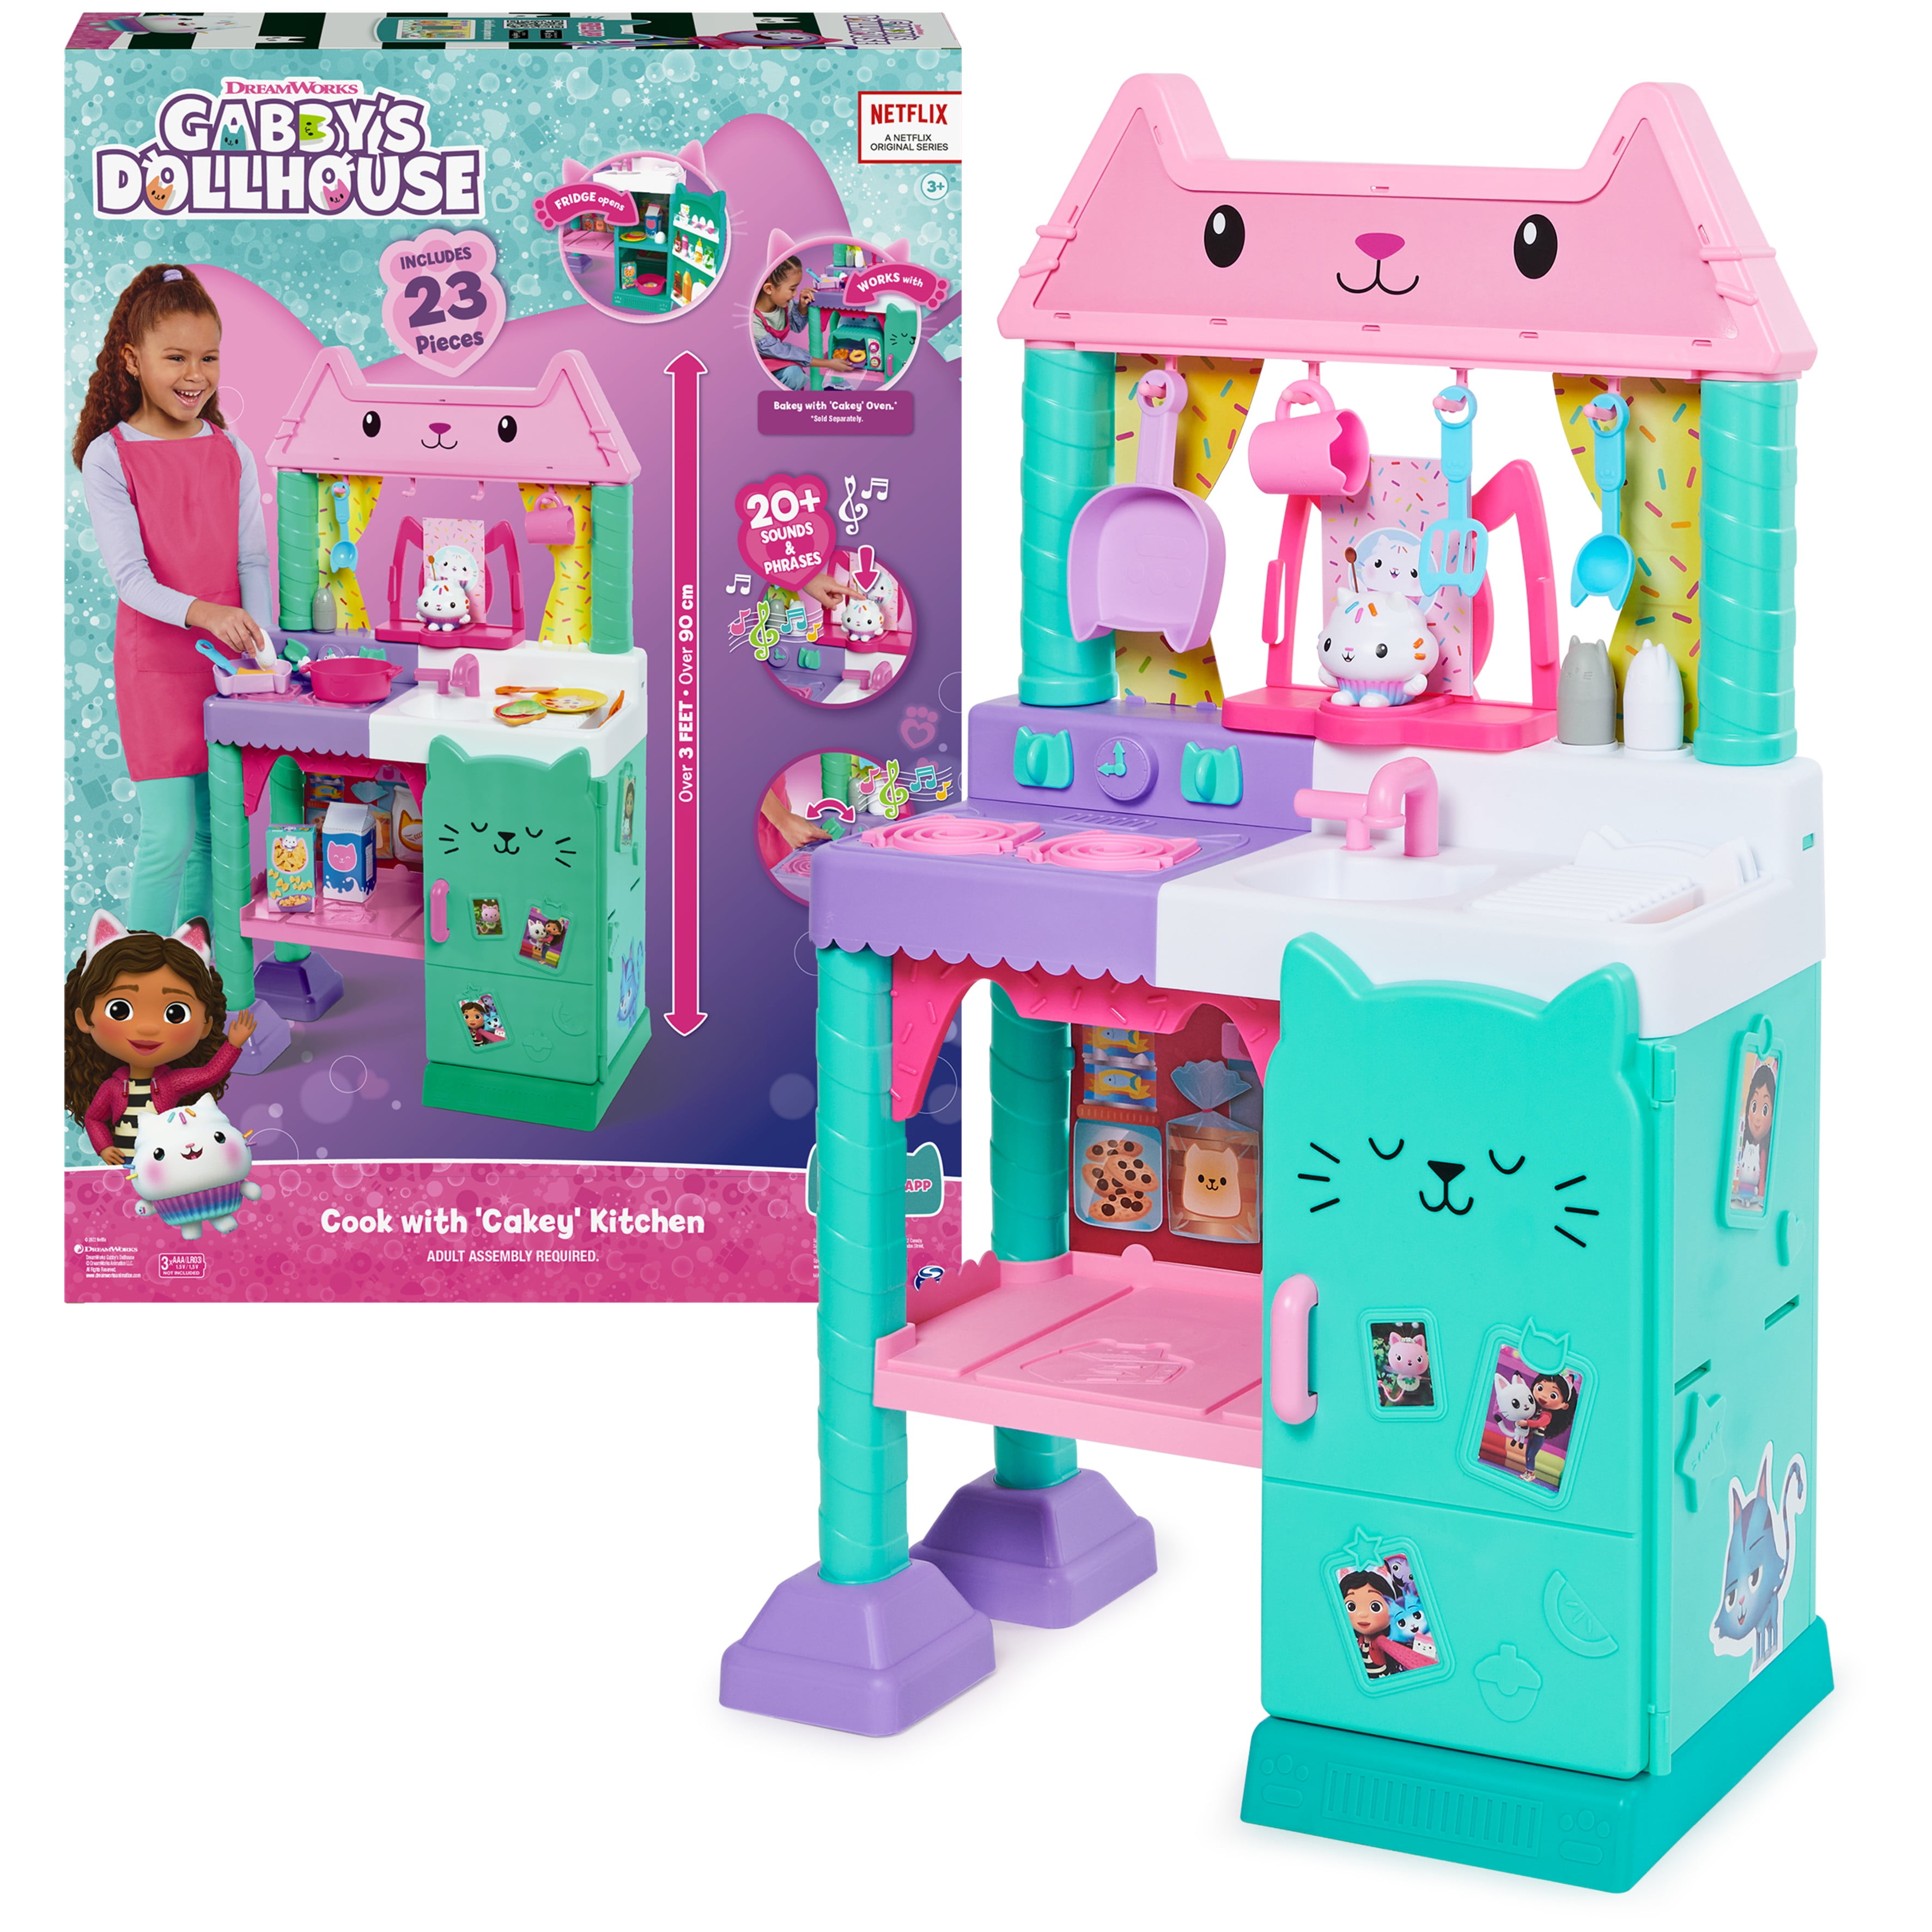 Gabby's Dollhouse, Cakey Play Kitchen Set, for Kids Ages 3 and up 